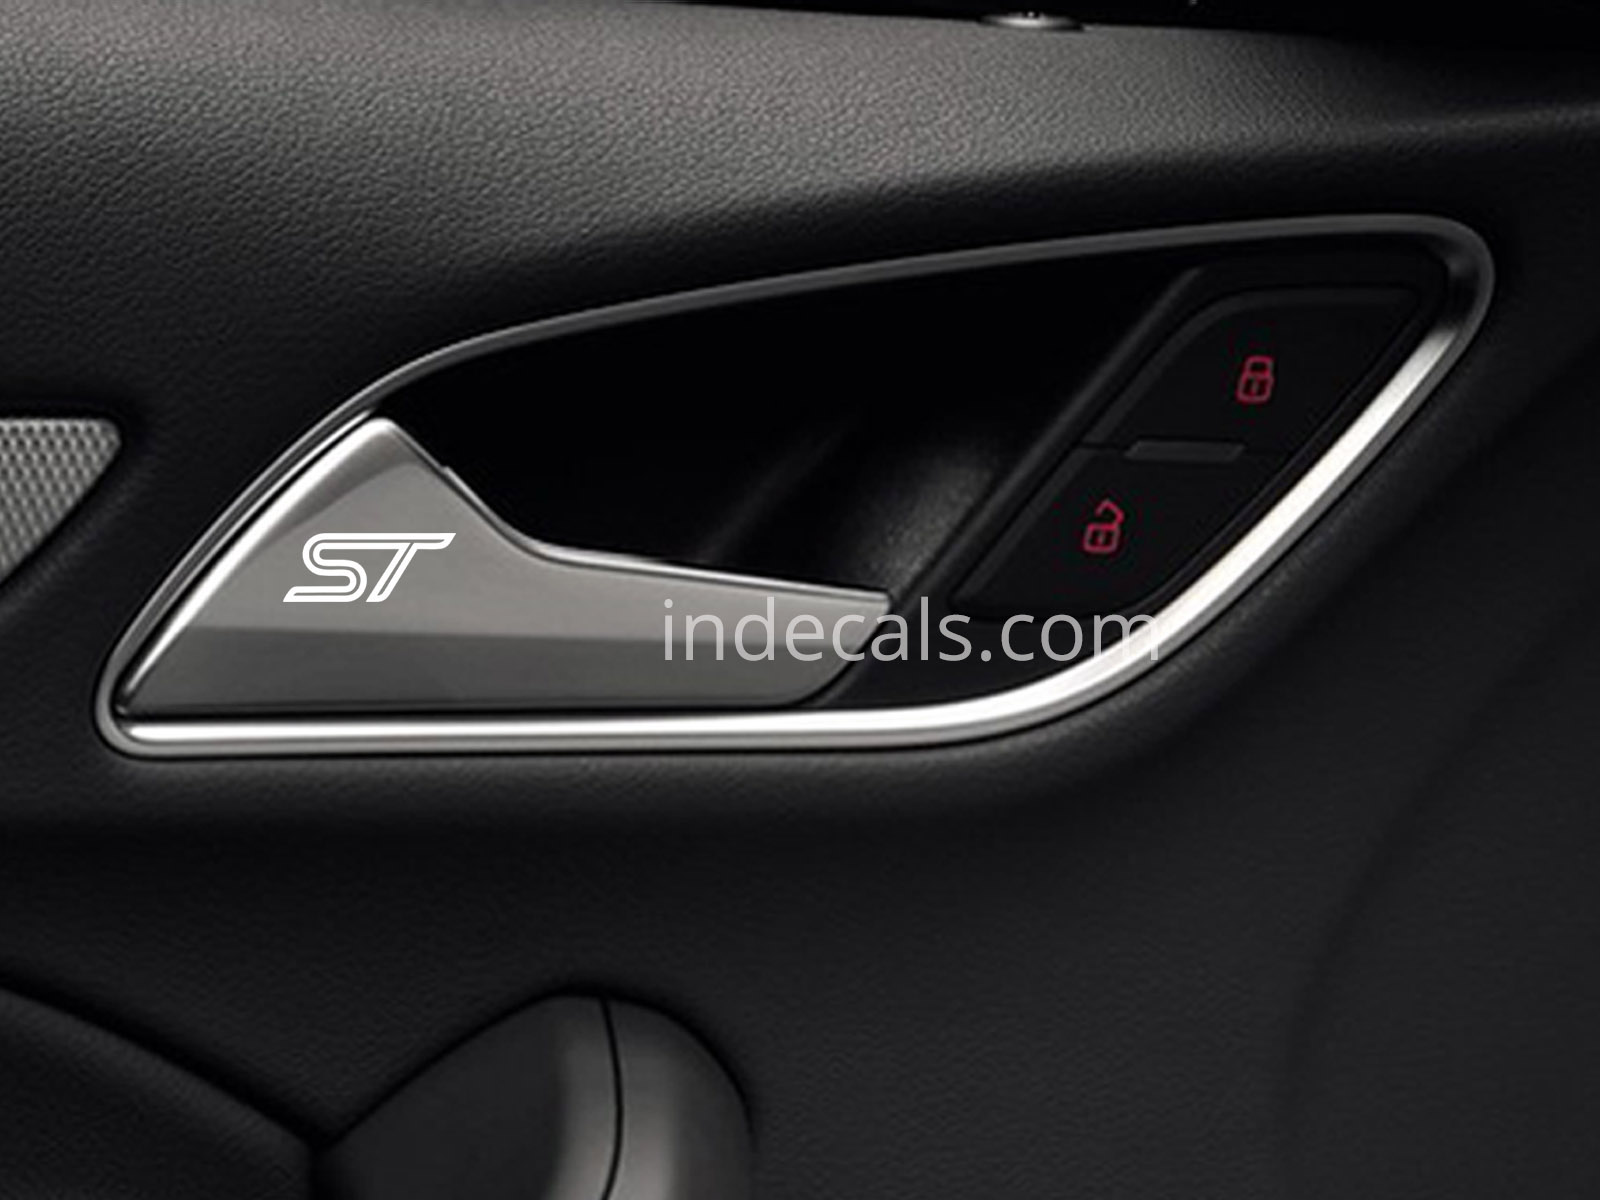 6 x Ford ST Stickers for Door Handle - White